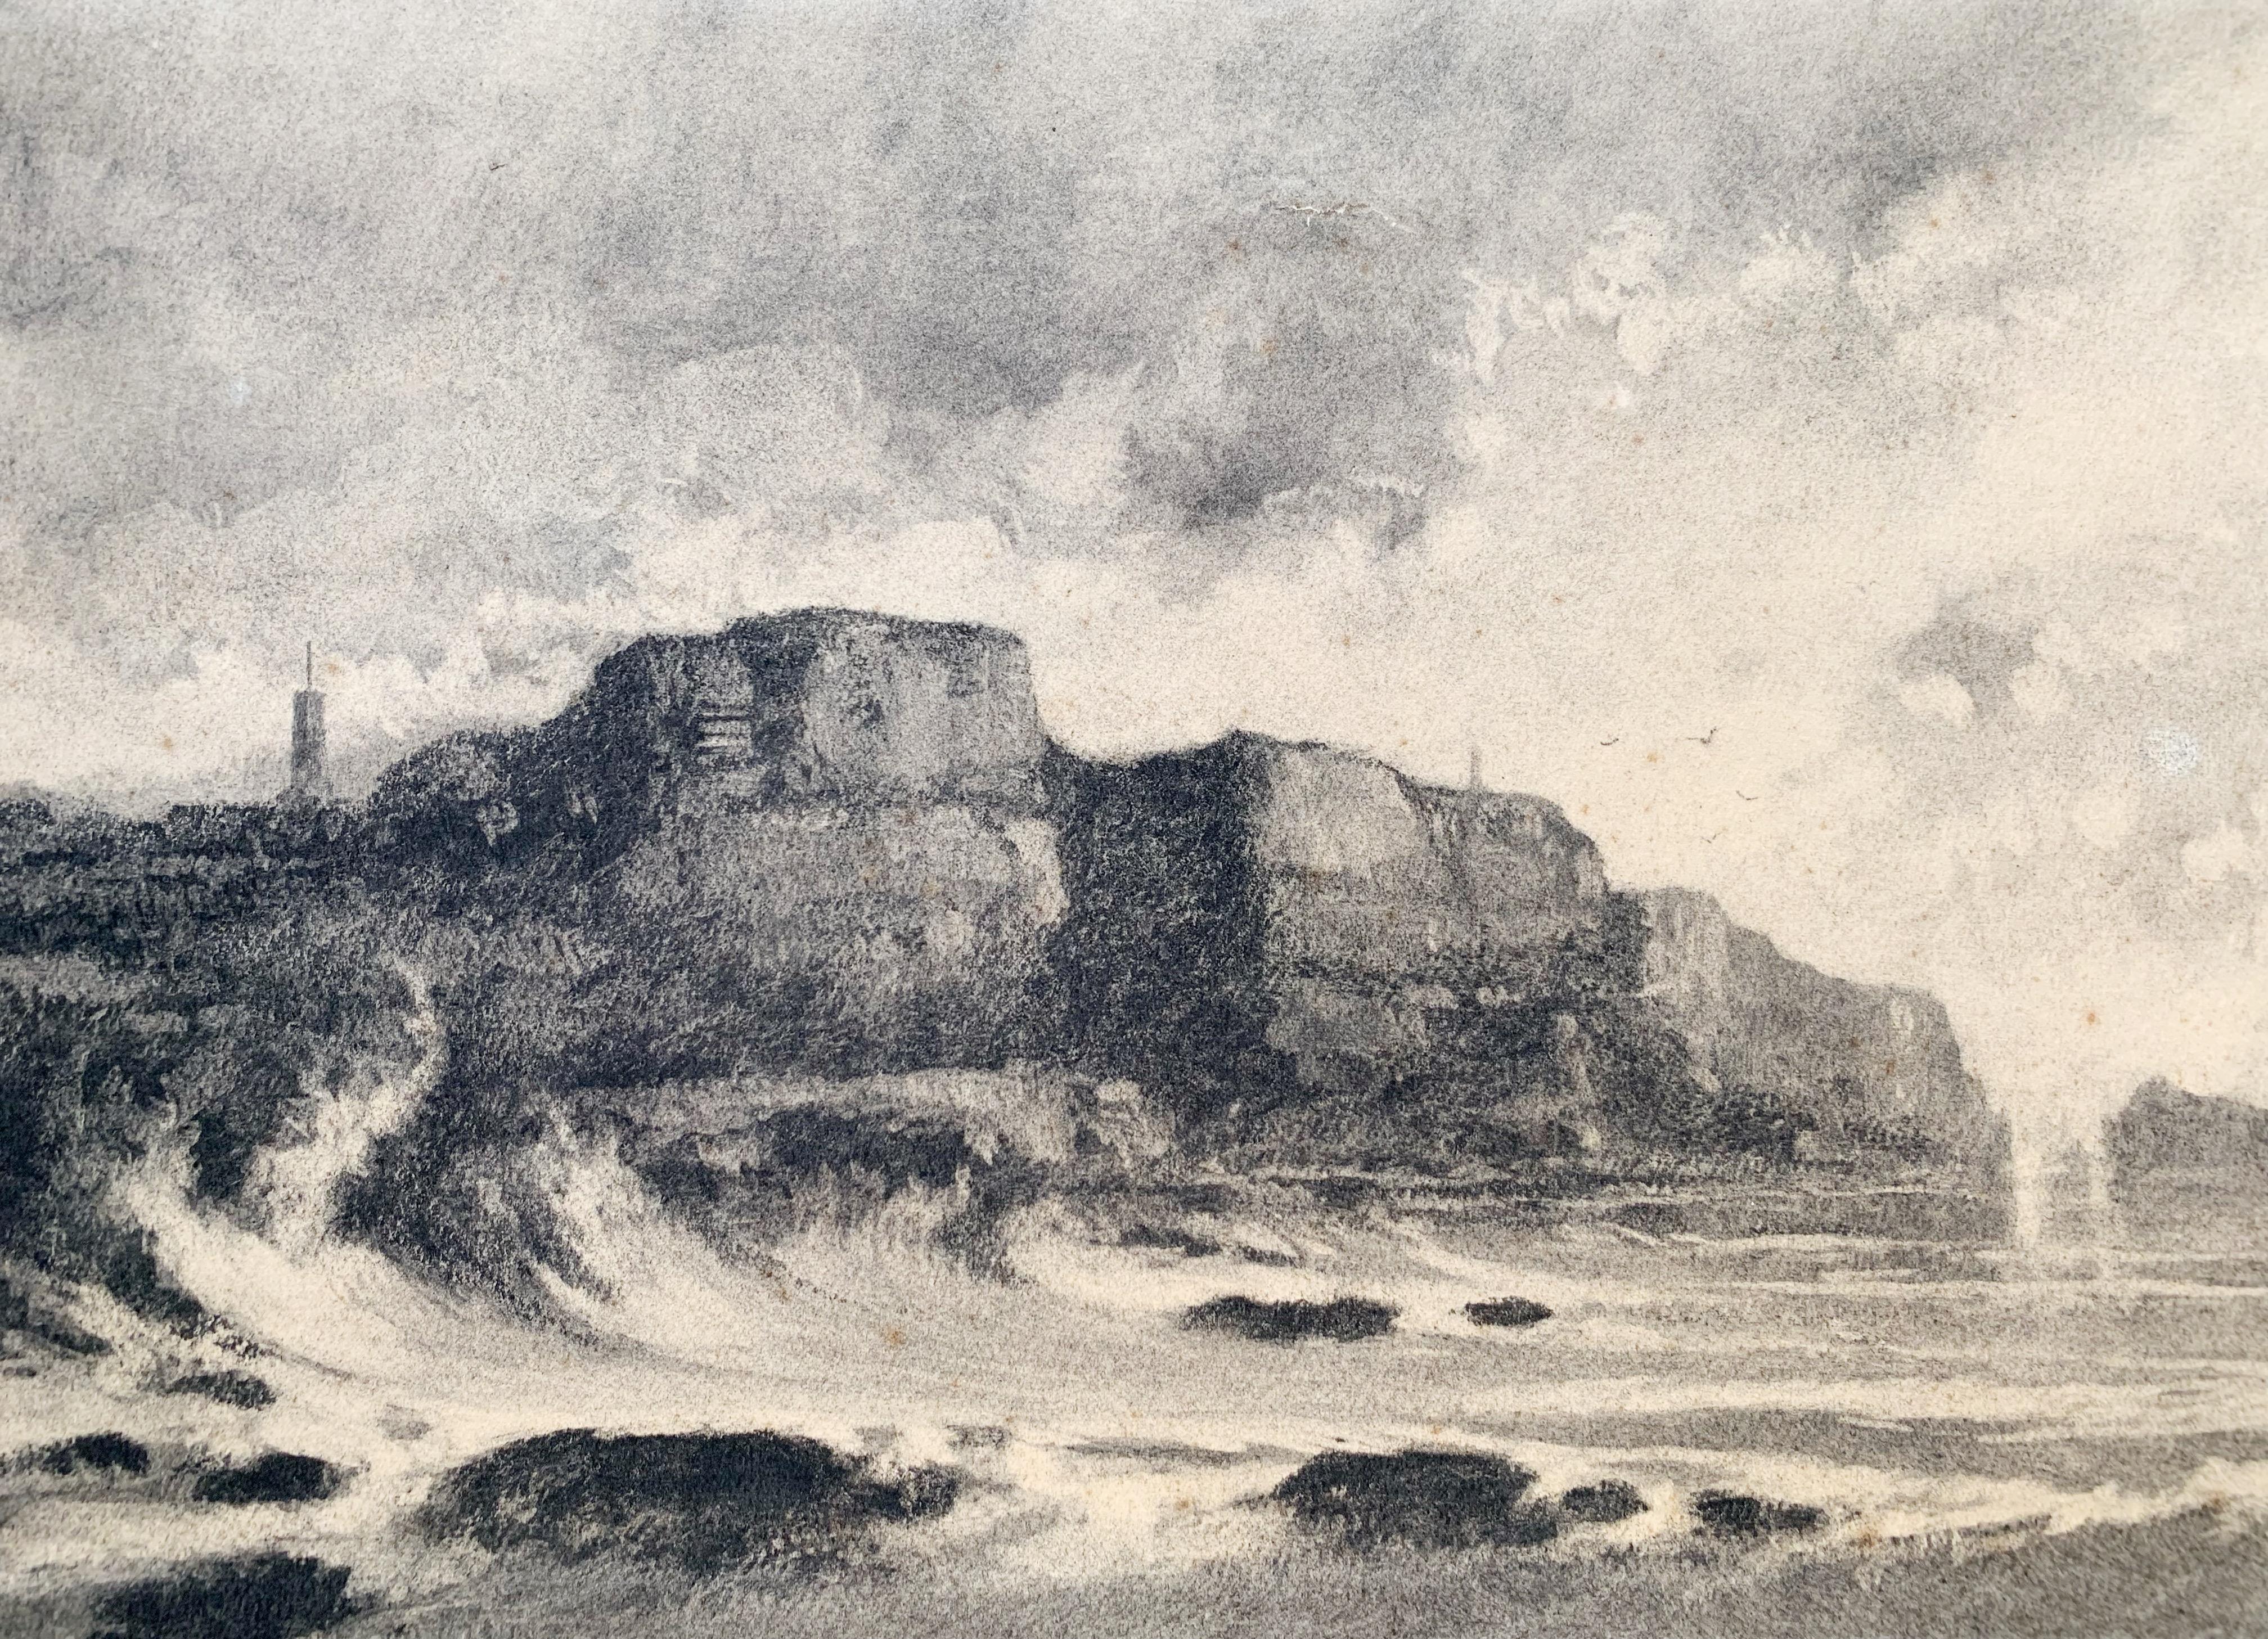 Frank Charles Peyraud (1858-1948)
Coastal landscape, 1882
Charcoal and shading on paper
Signed 